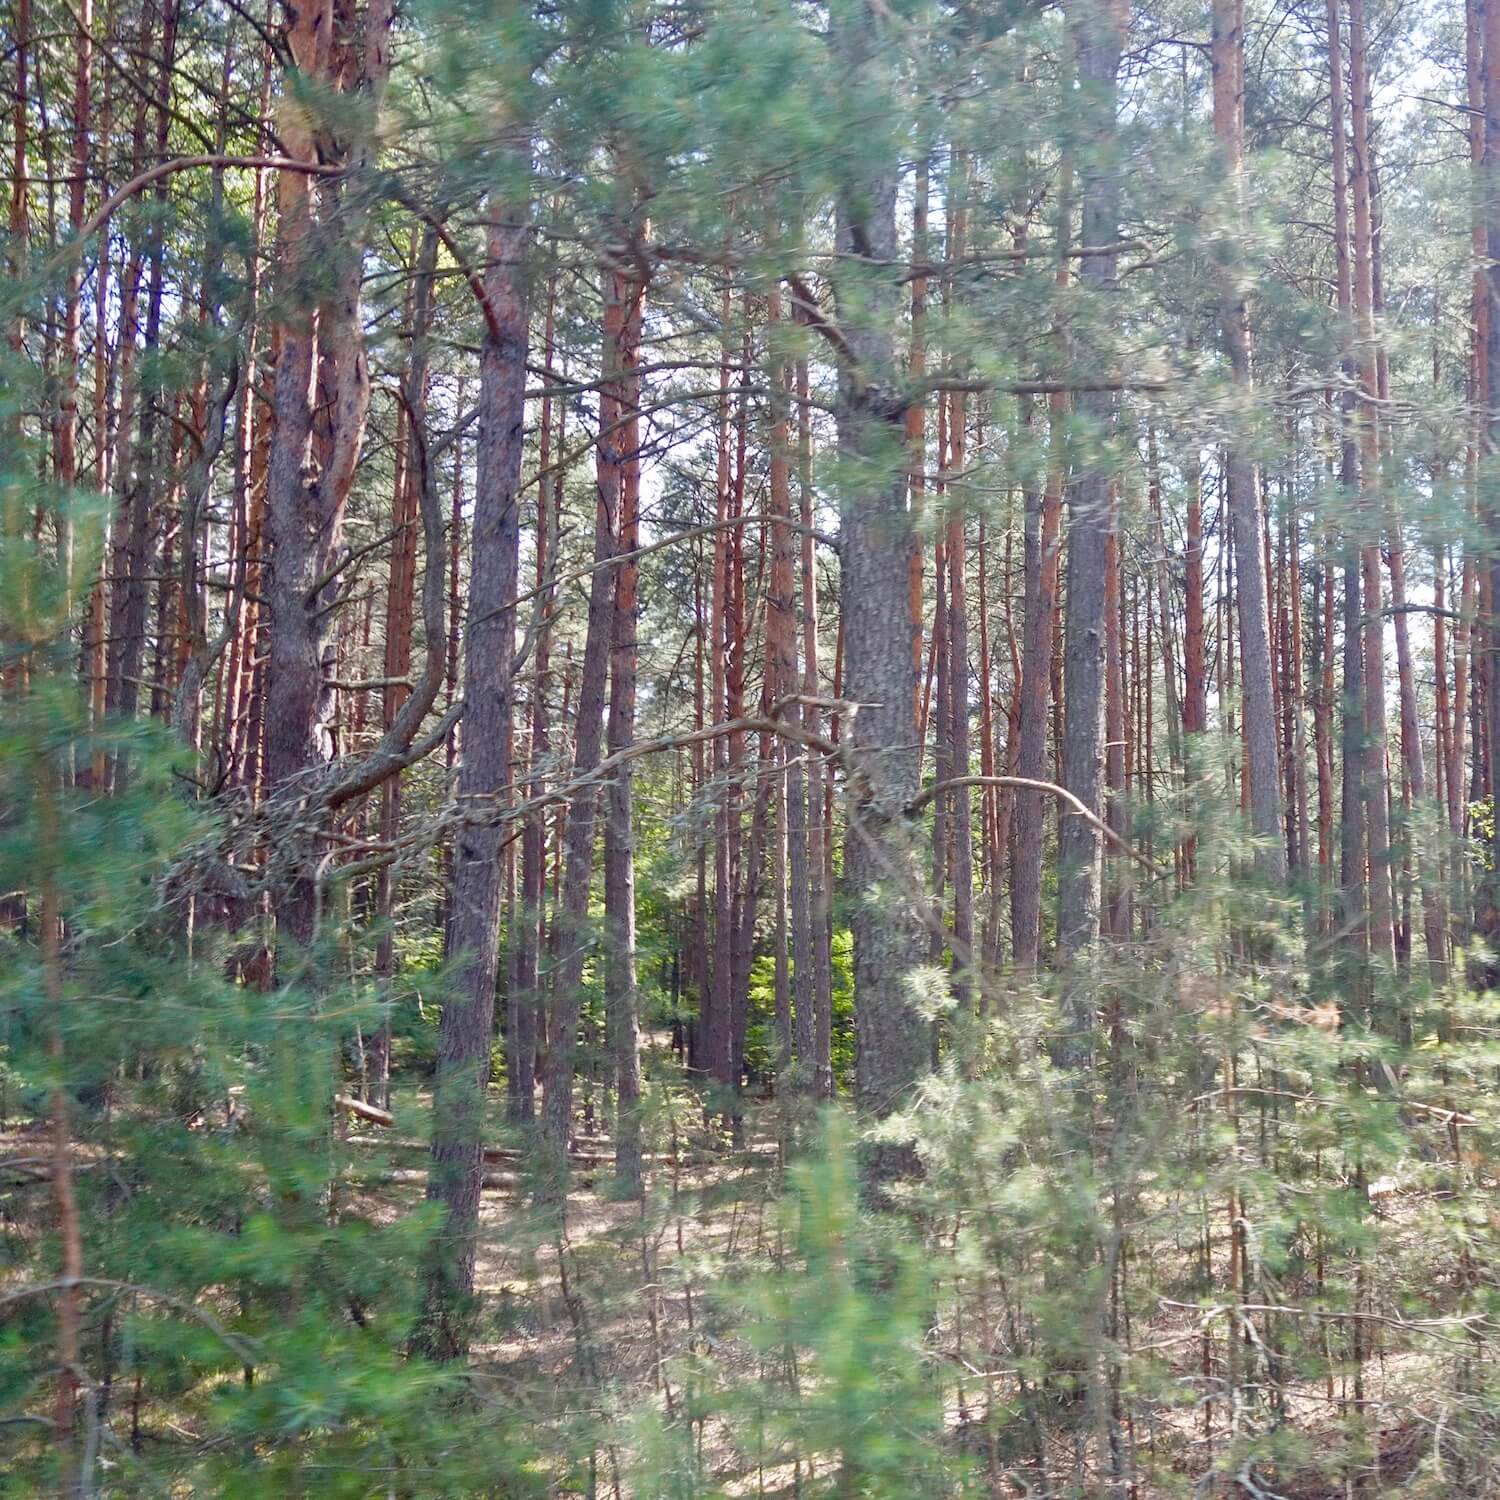 A pine forest with young reddish trees on the drive to the secret soviet military installation that housed the large radar system known as the Russian woodpecker. The forest is thick with new life.